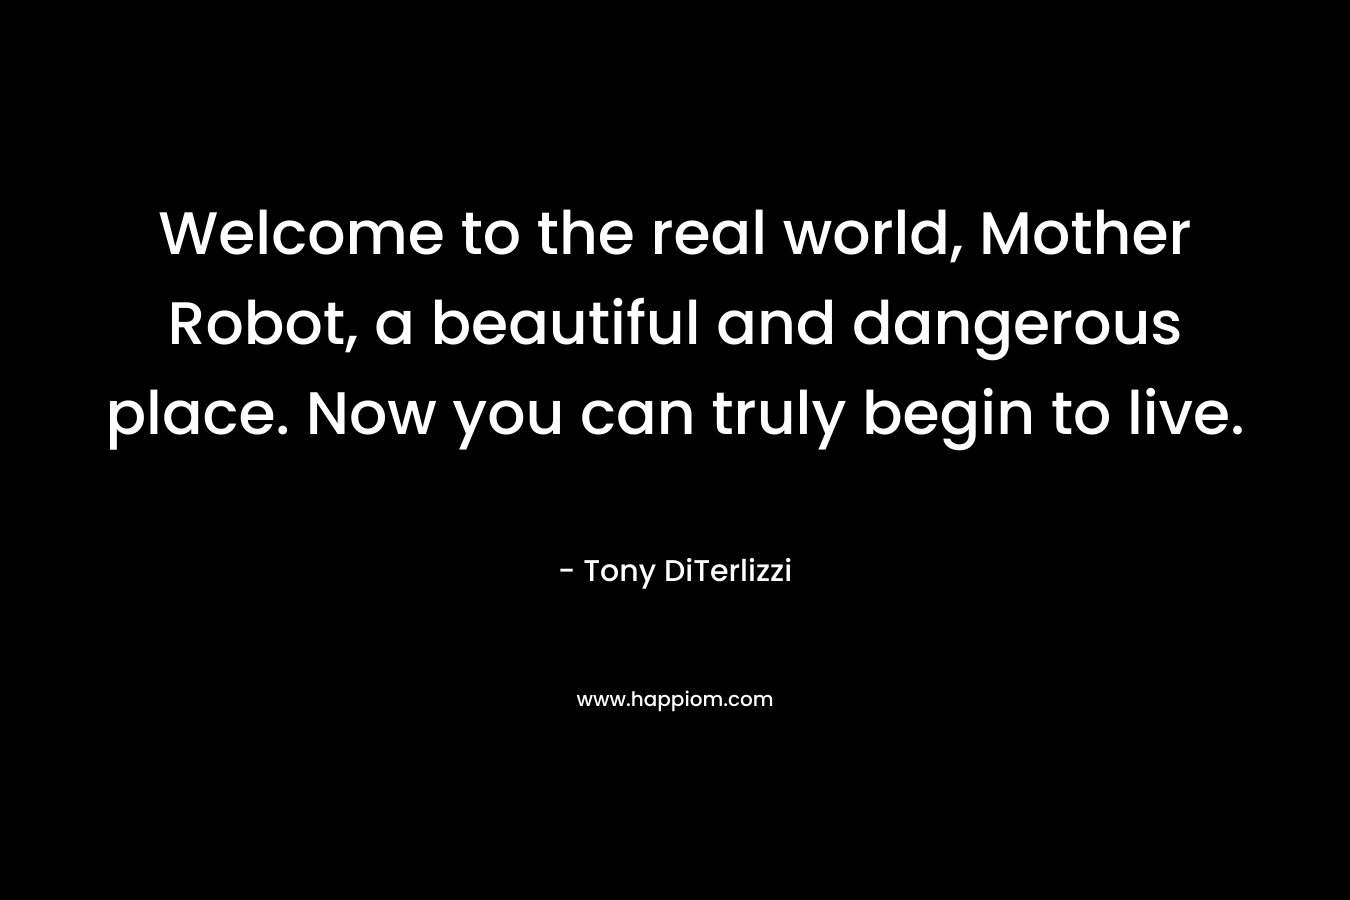 Welcome to the real world, Mother Robot, a beautiful and dangerous place. Now you can truly begin to live. – Tony DiTerlizzi